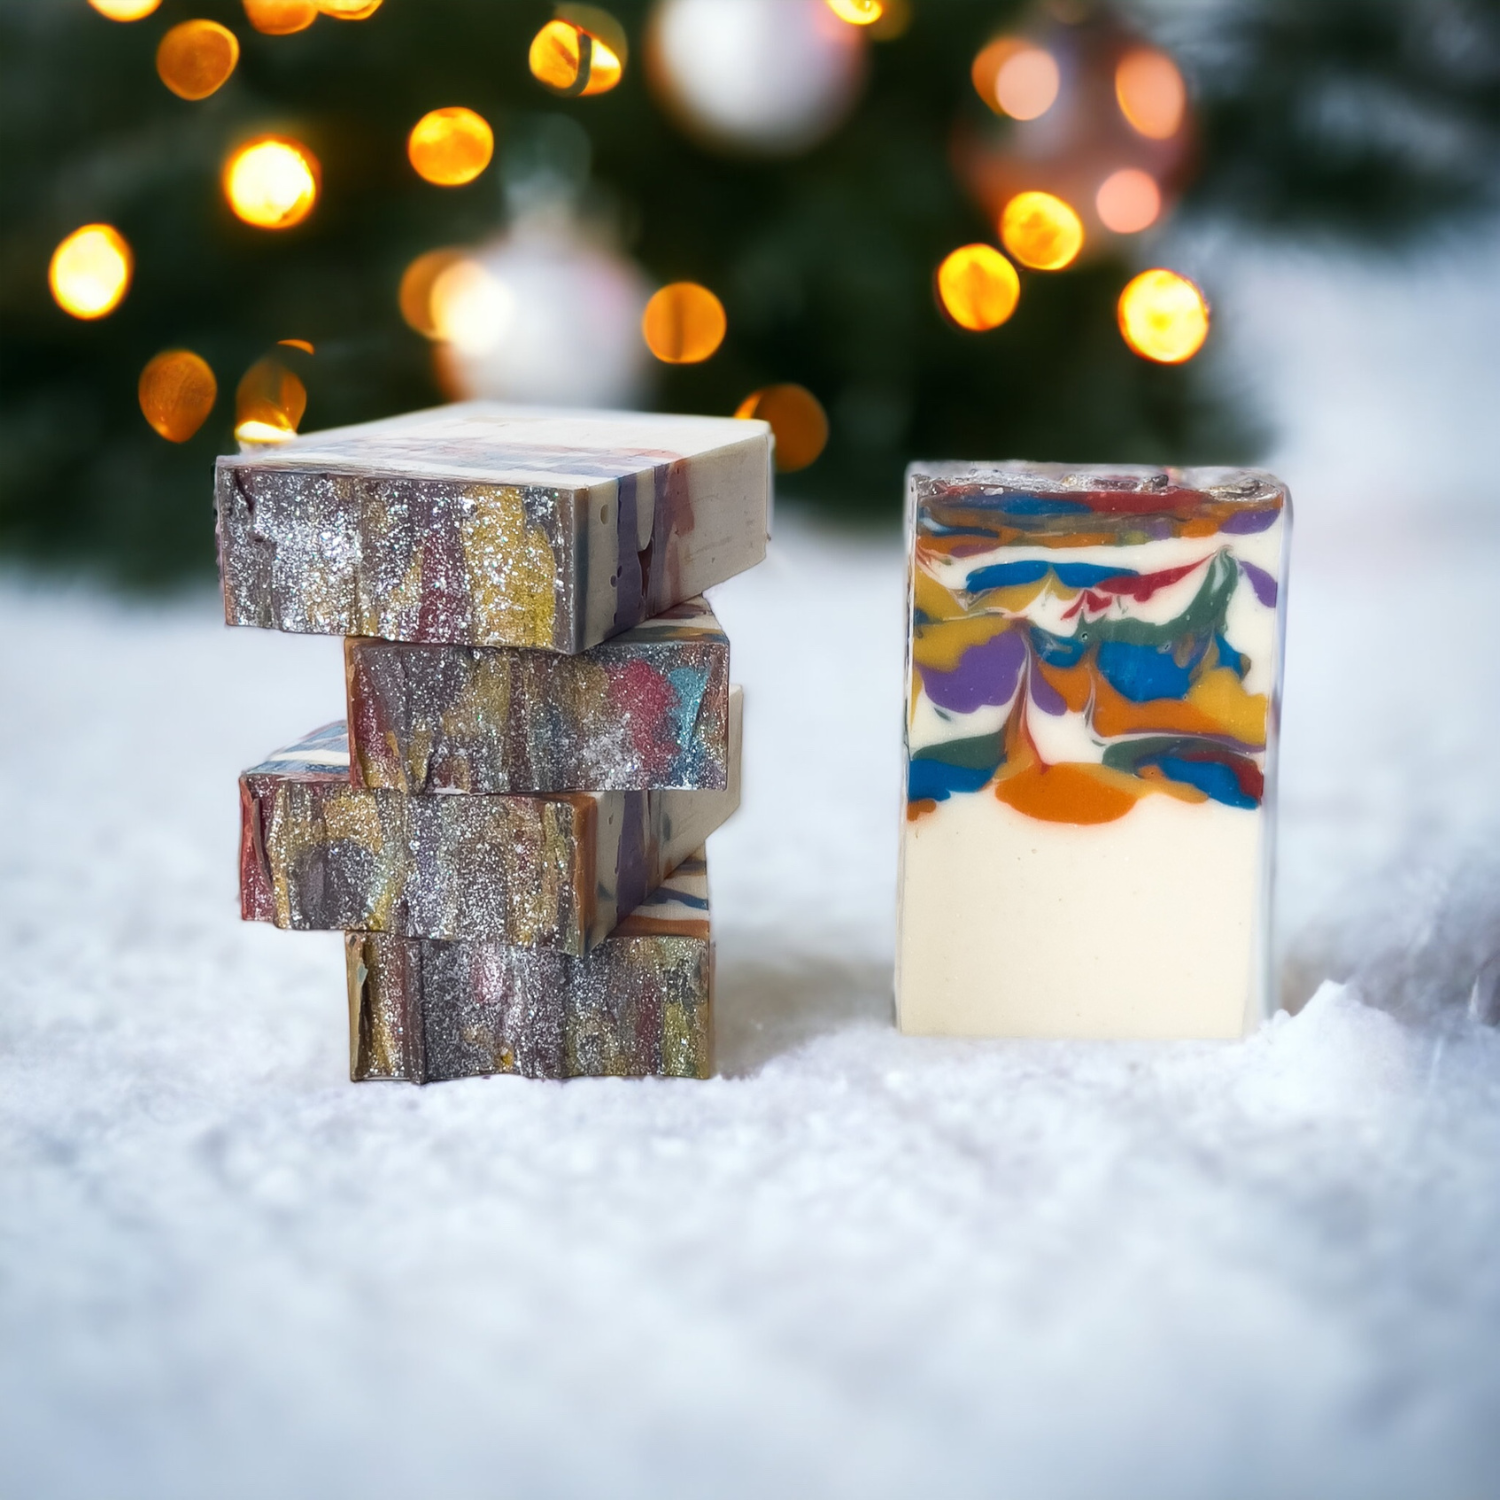 merry & bright | with colloidal oats, kaolin clay and wild silk